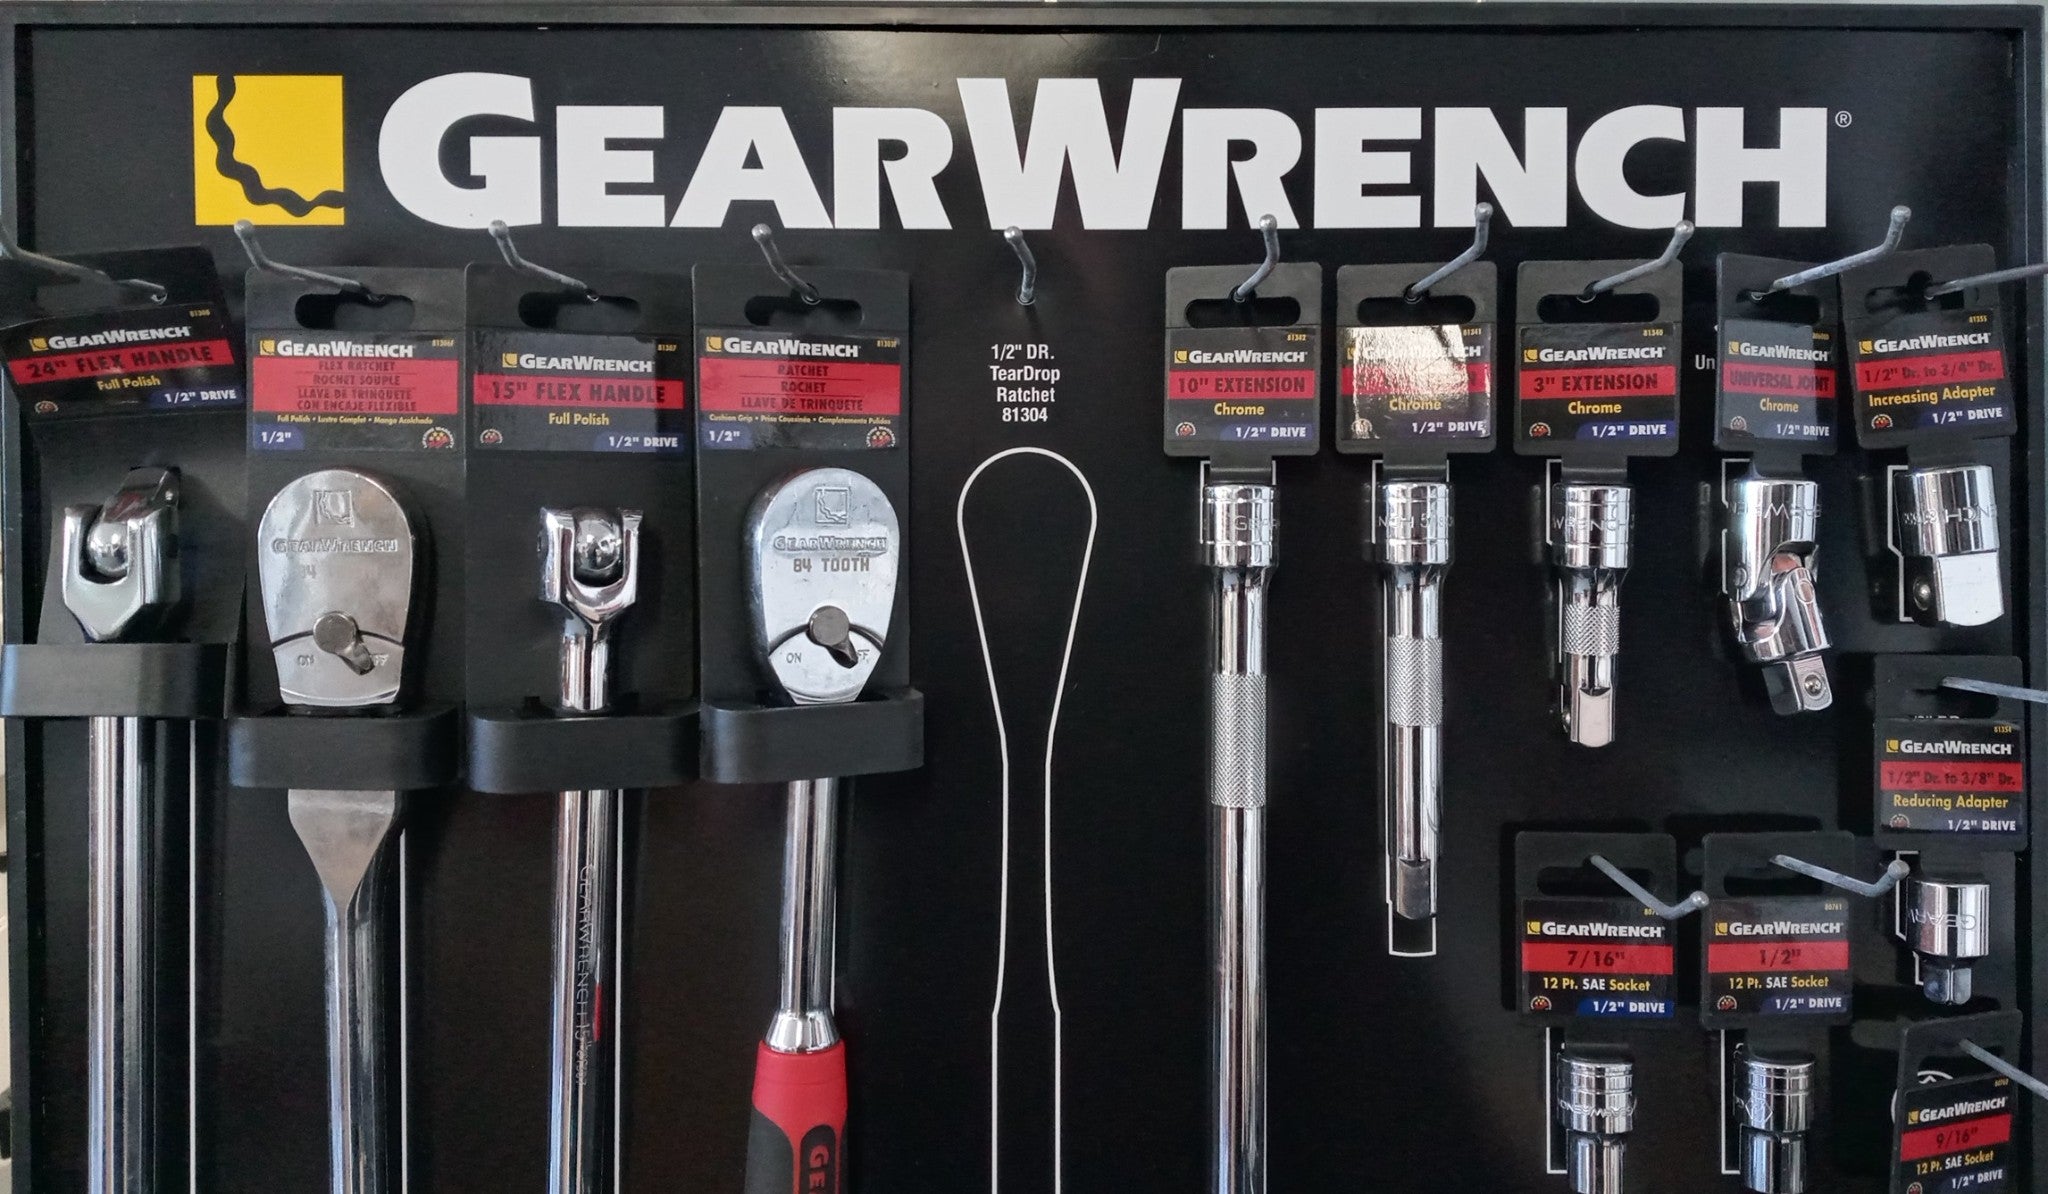 GearWrench 81435 Merchandiser Display 30pc 1/2" Drive Ratchet and Socket Set